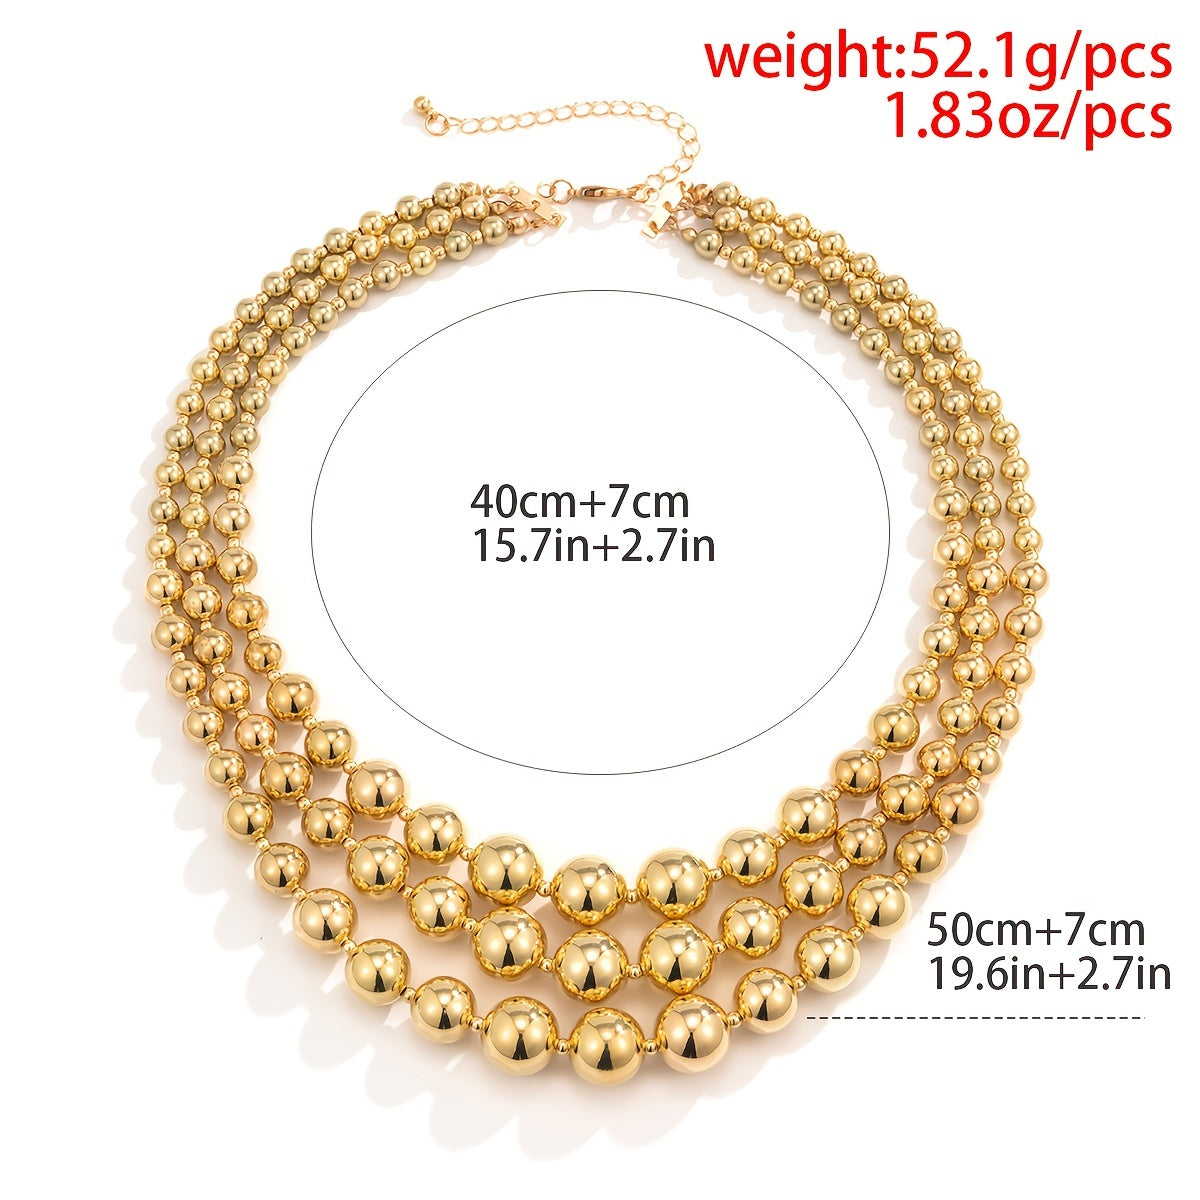 Make a Statement with our Exaggerated Geometric CCB Ball Clavicle Chain Hip Hop Necklace in Gold